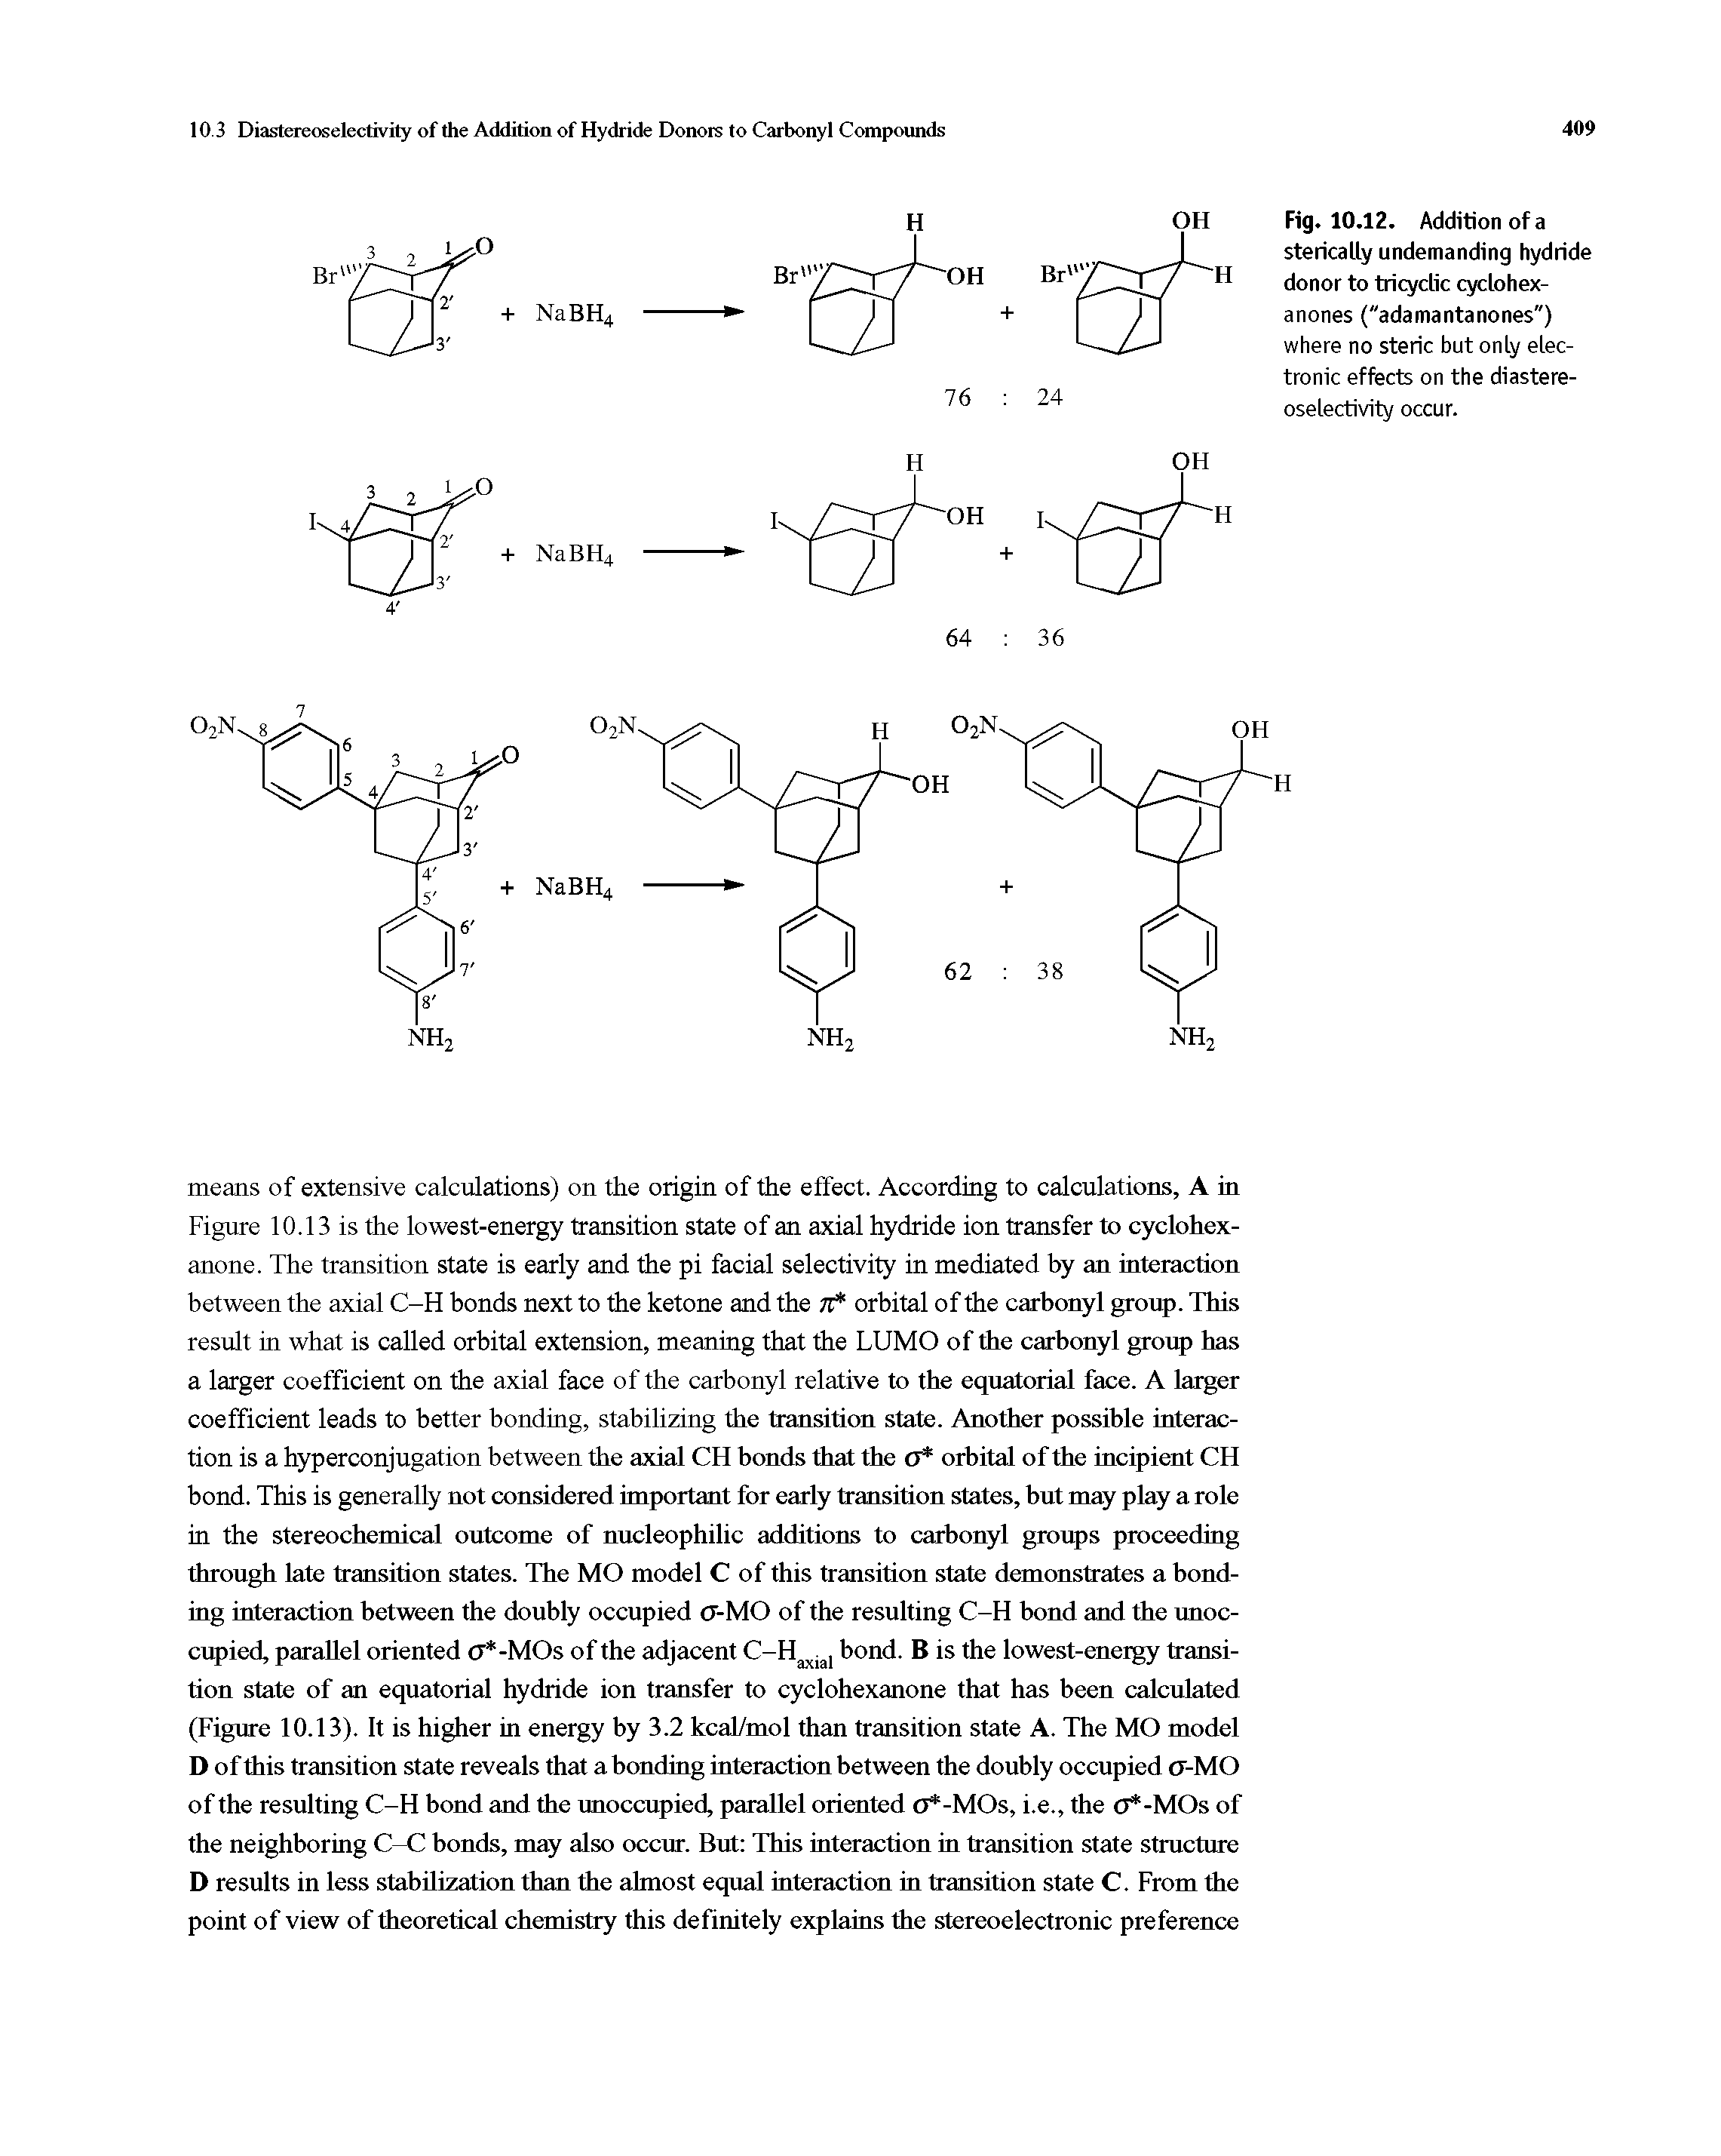 Fig. 10.12. Addition of a sterically undemanding hydride donor to tricyclic cyclohexanones ("adamantanones") where no steric but only electronic effects on the diastereoselectivity occur.